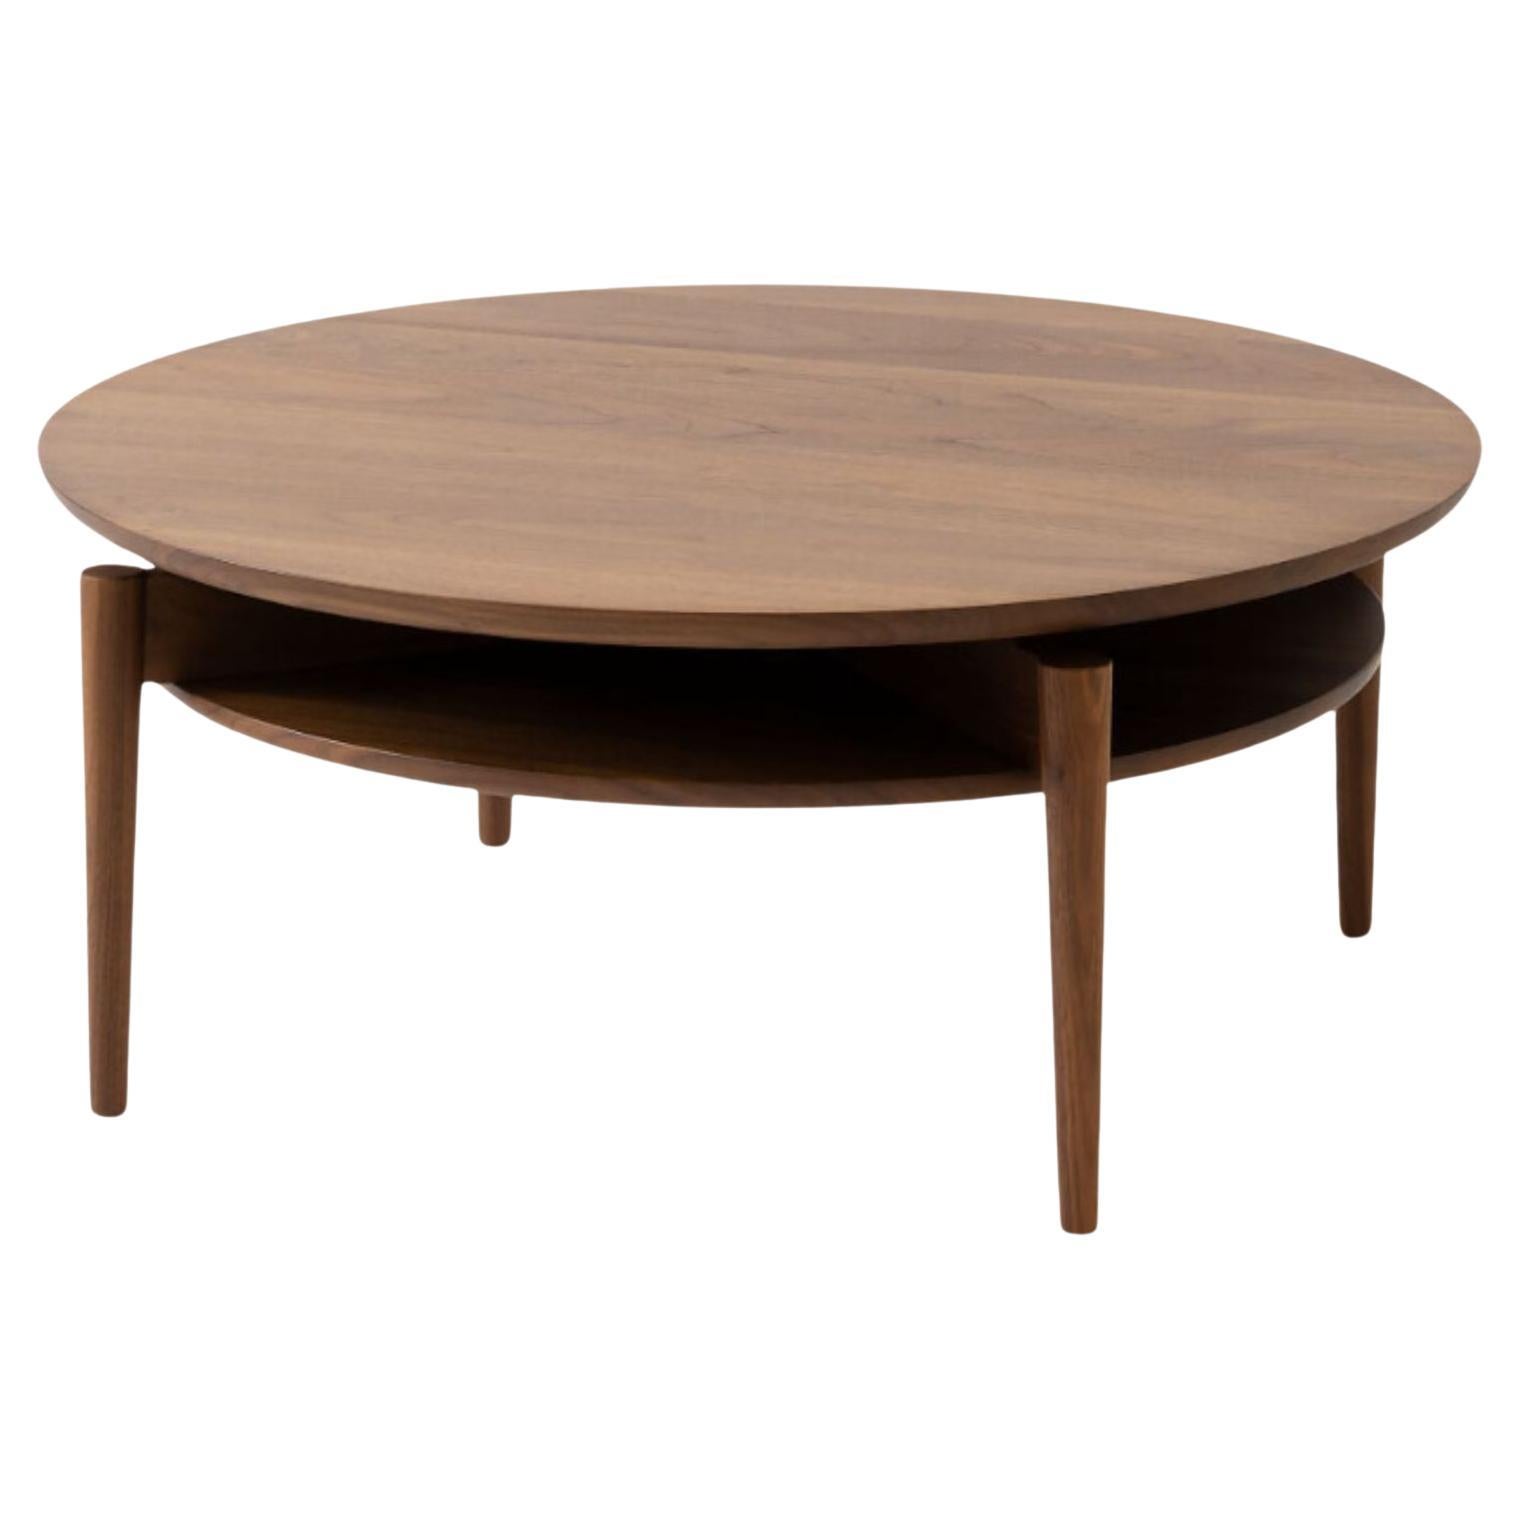 'Ongo' Coffee Table in Oak and With Shelf for Hida In New Condition For Sale In Glendale, CA